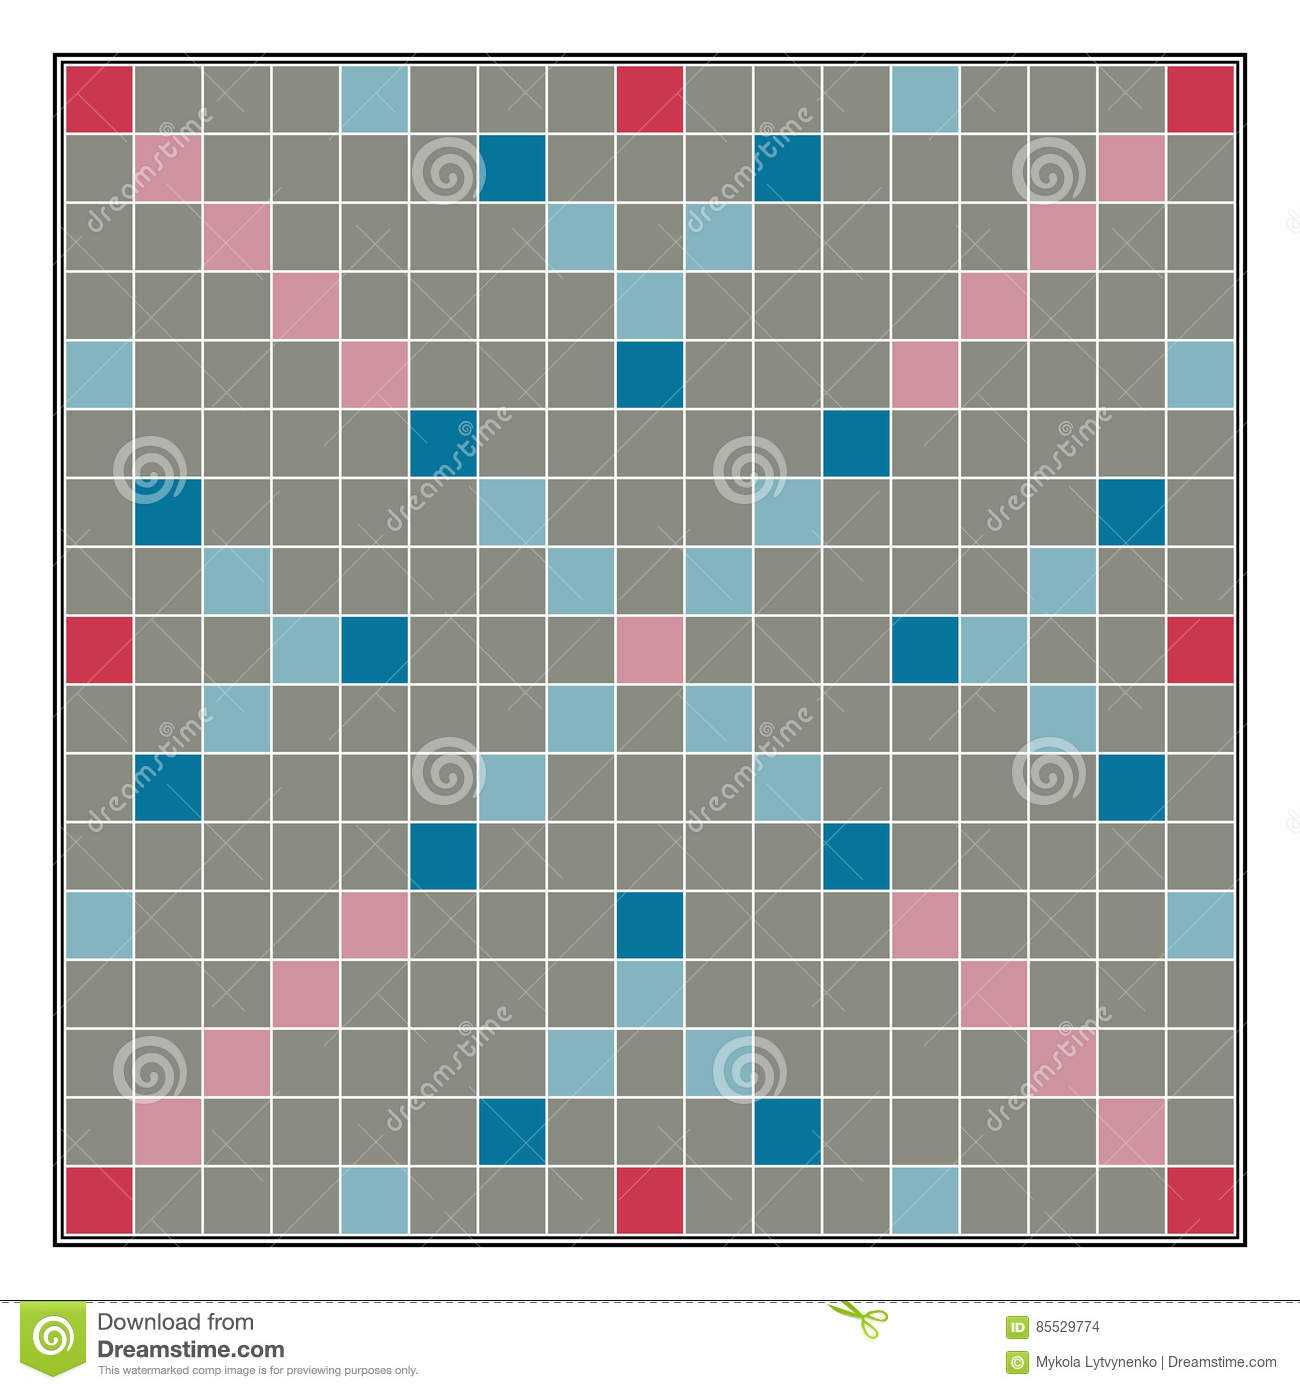 Board Game Making Words From Letters Scrabble Stock Vector Throughout Making Words Template